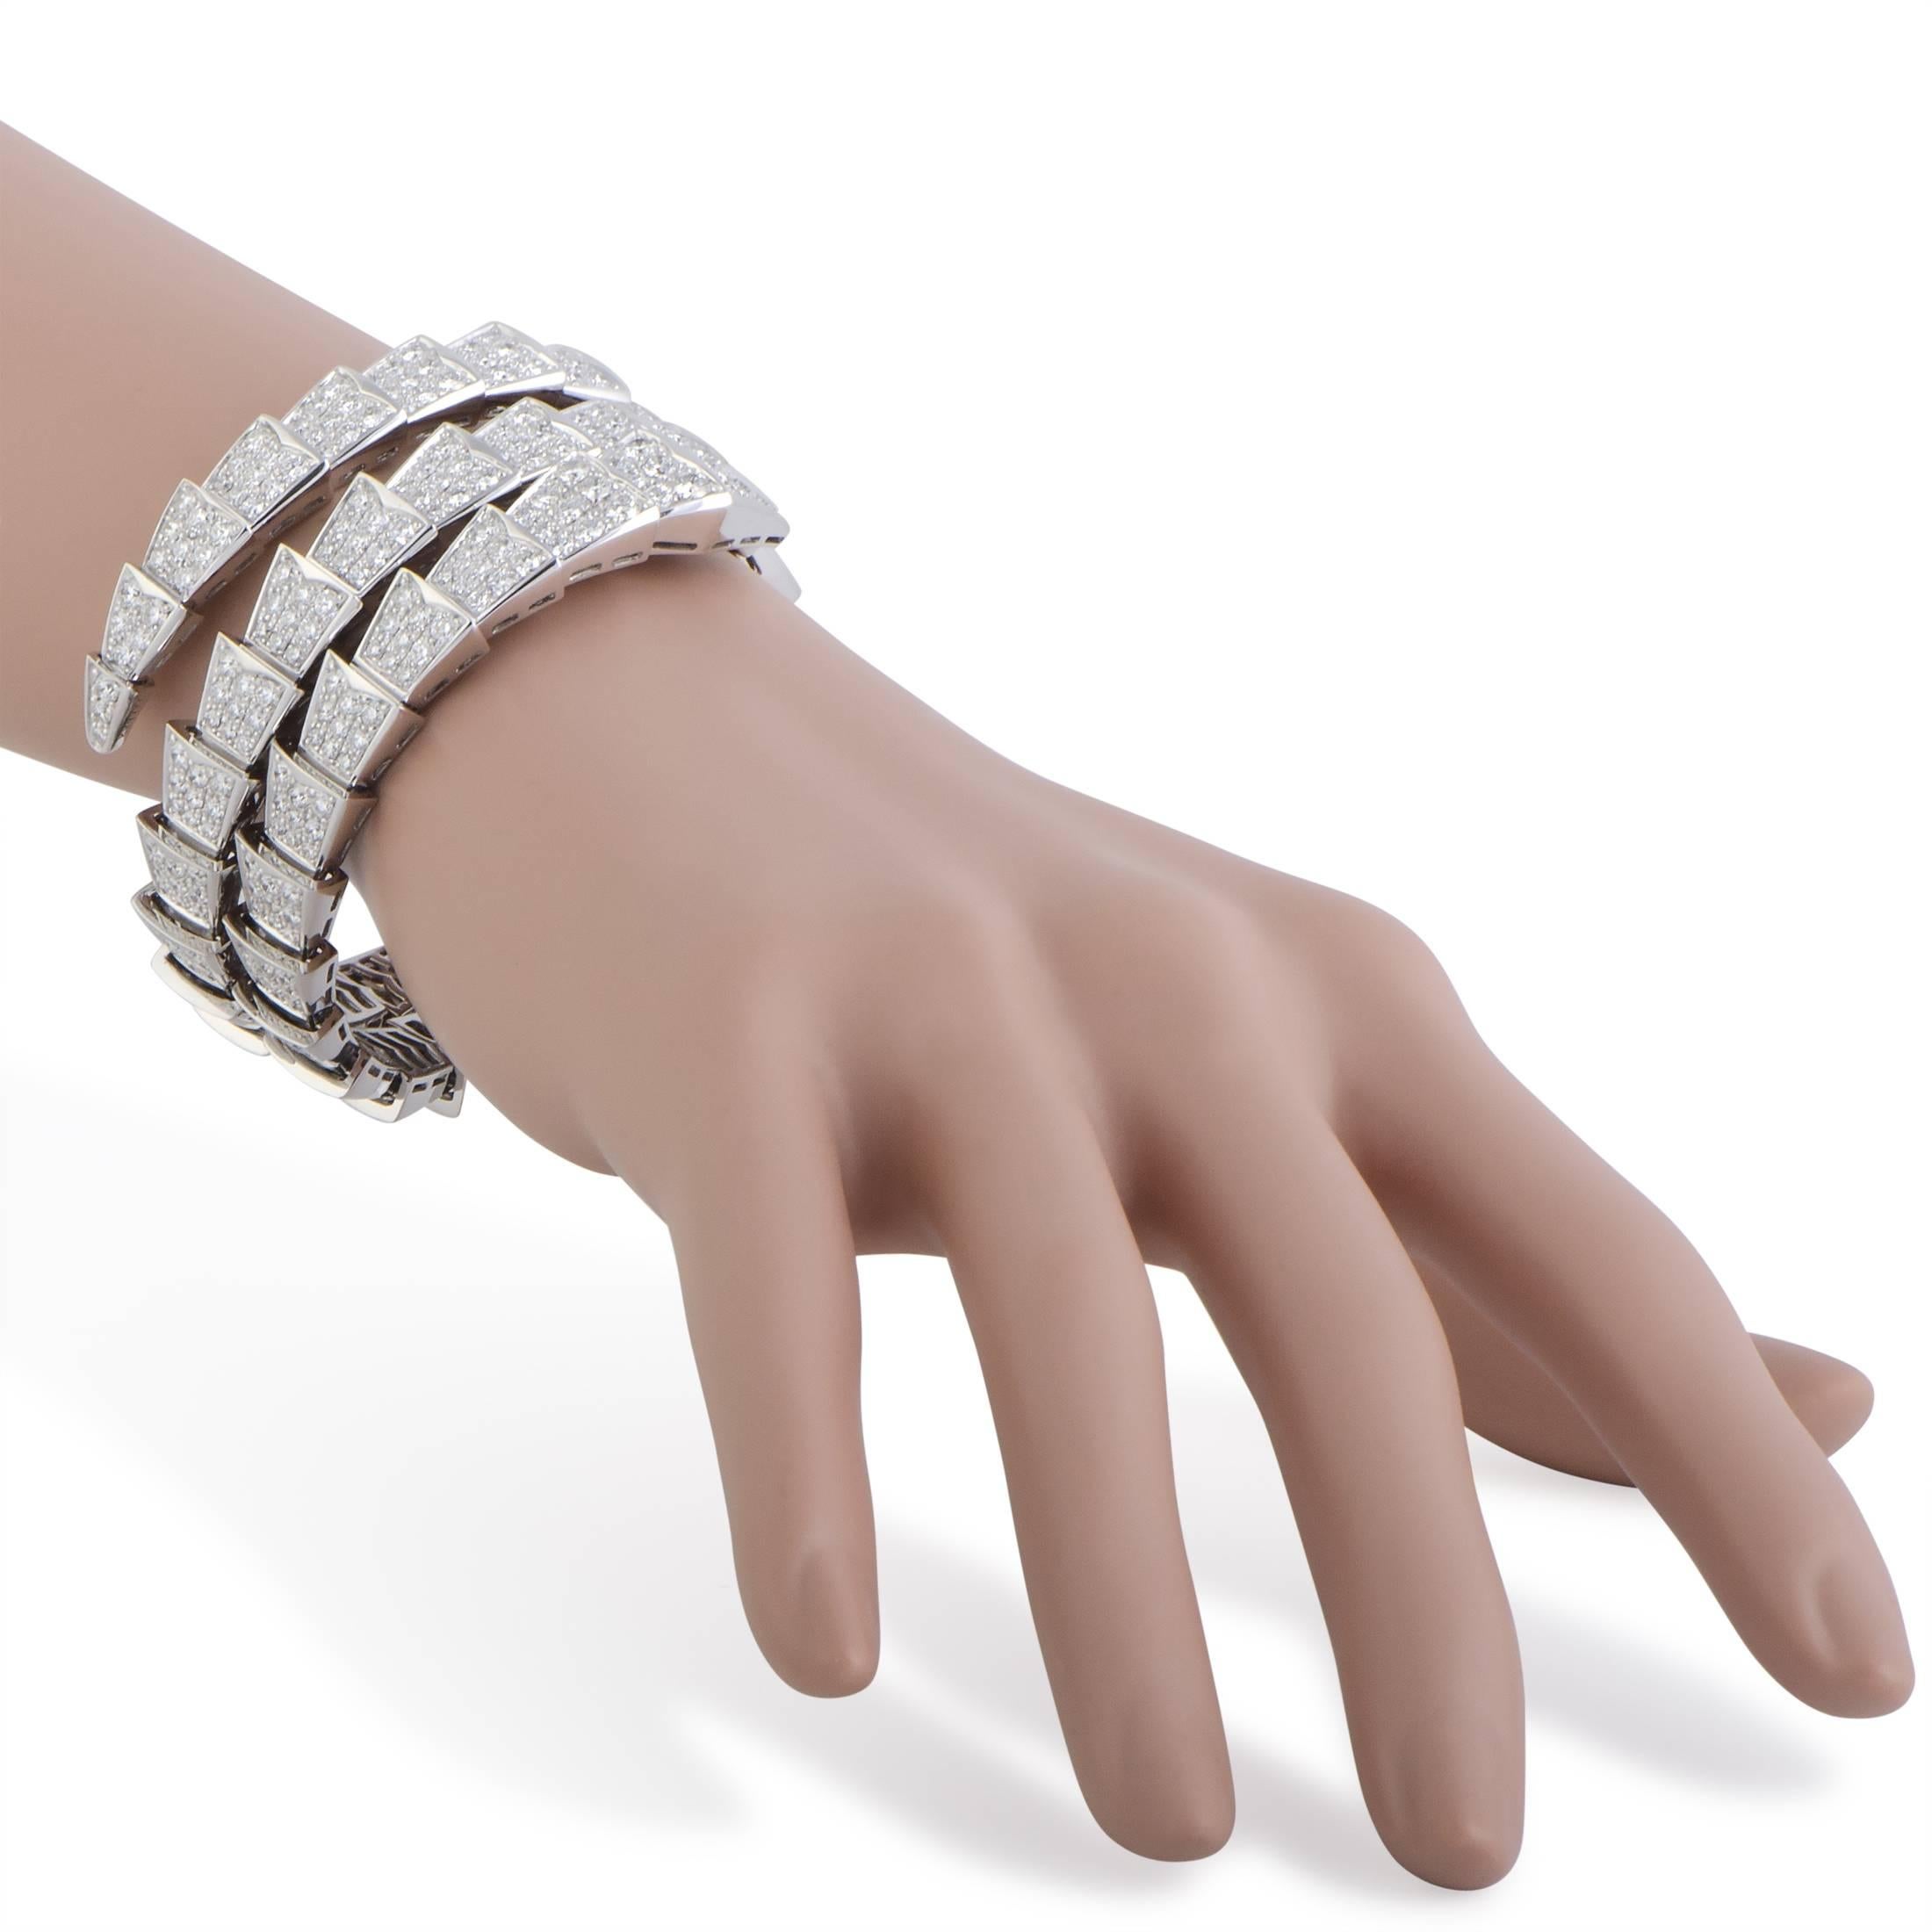 Spectacularly designed and expertly crafted, this fabulous bracelet boasts a stunningly extravagant appeal. It compels with its exceptionally fashionable style and incredibly luxurious diamond décor. The bracelet is presented within the iconic